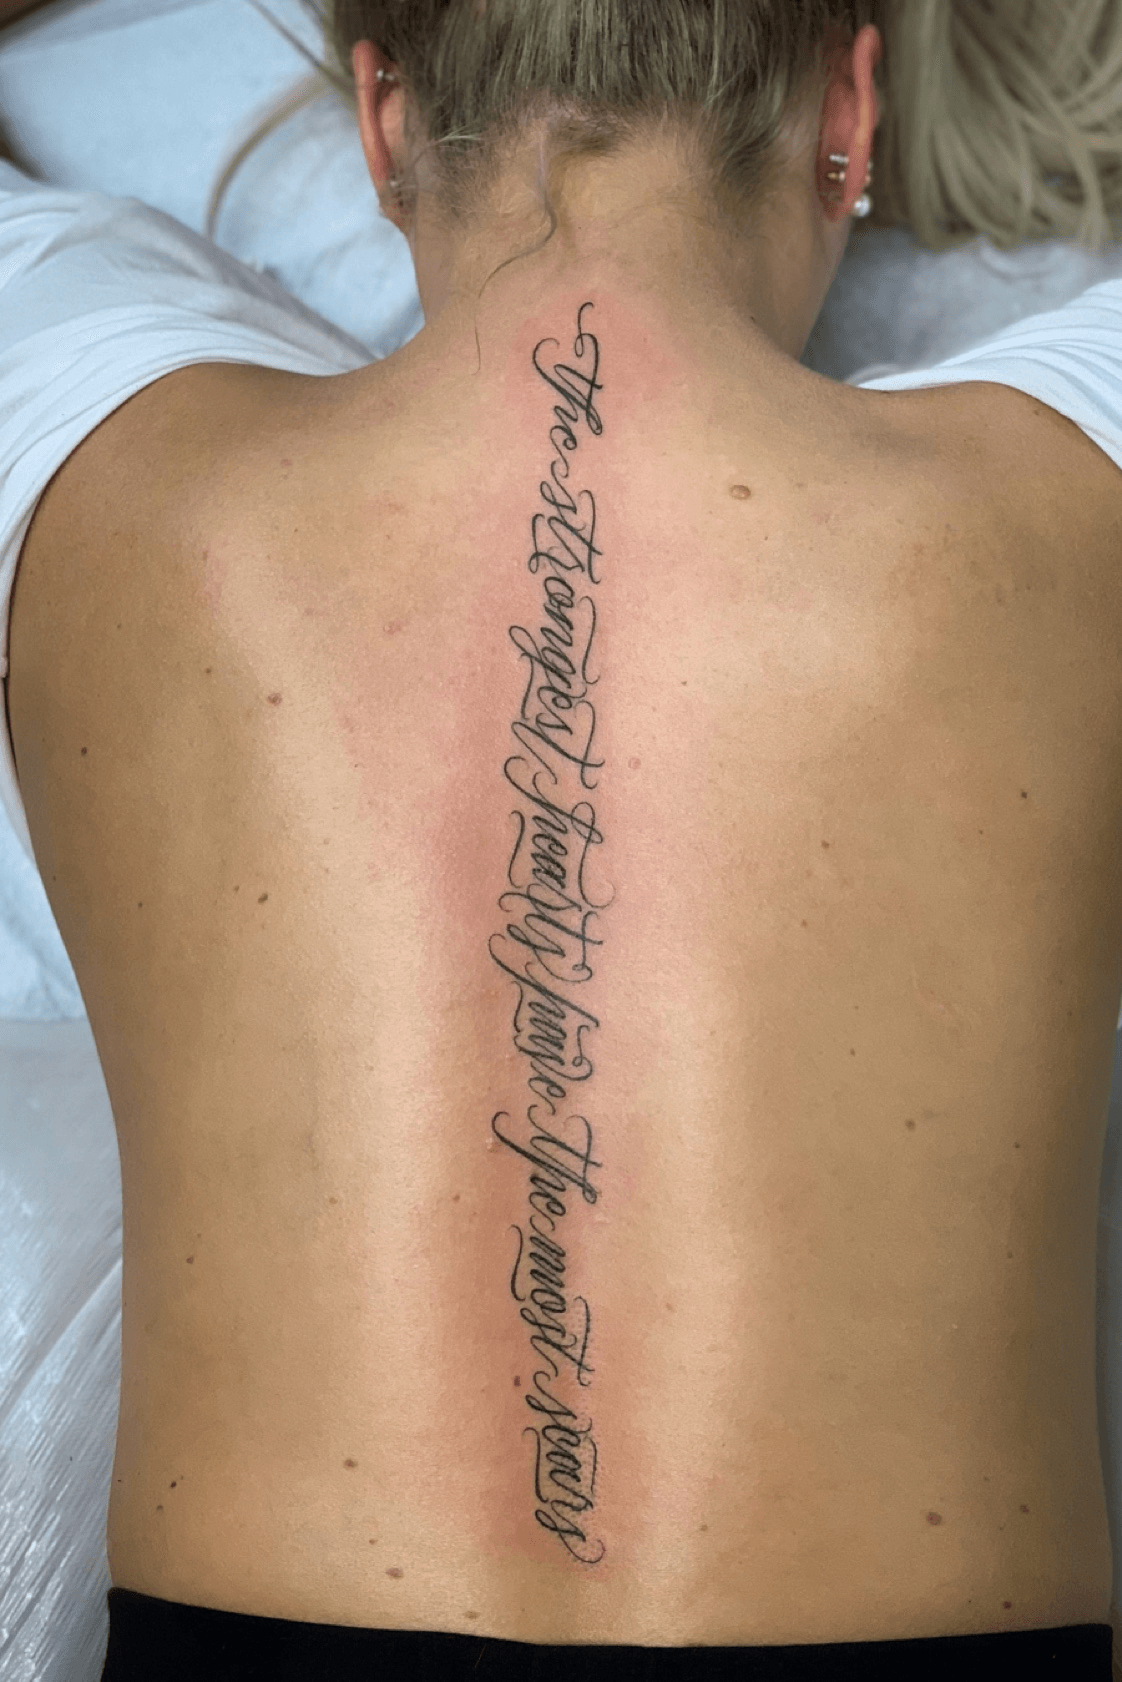 Tattoo uploaded by Lio  Scipt Spine tattoo script scripttattoo  lettering text 3109010862 for appointments  Tattoodo